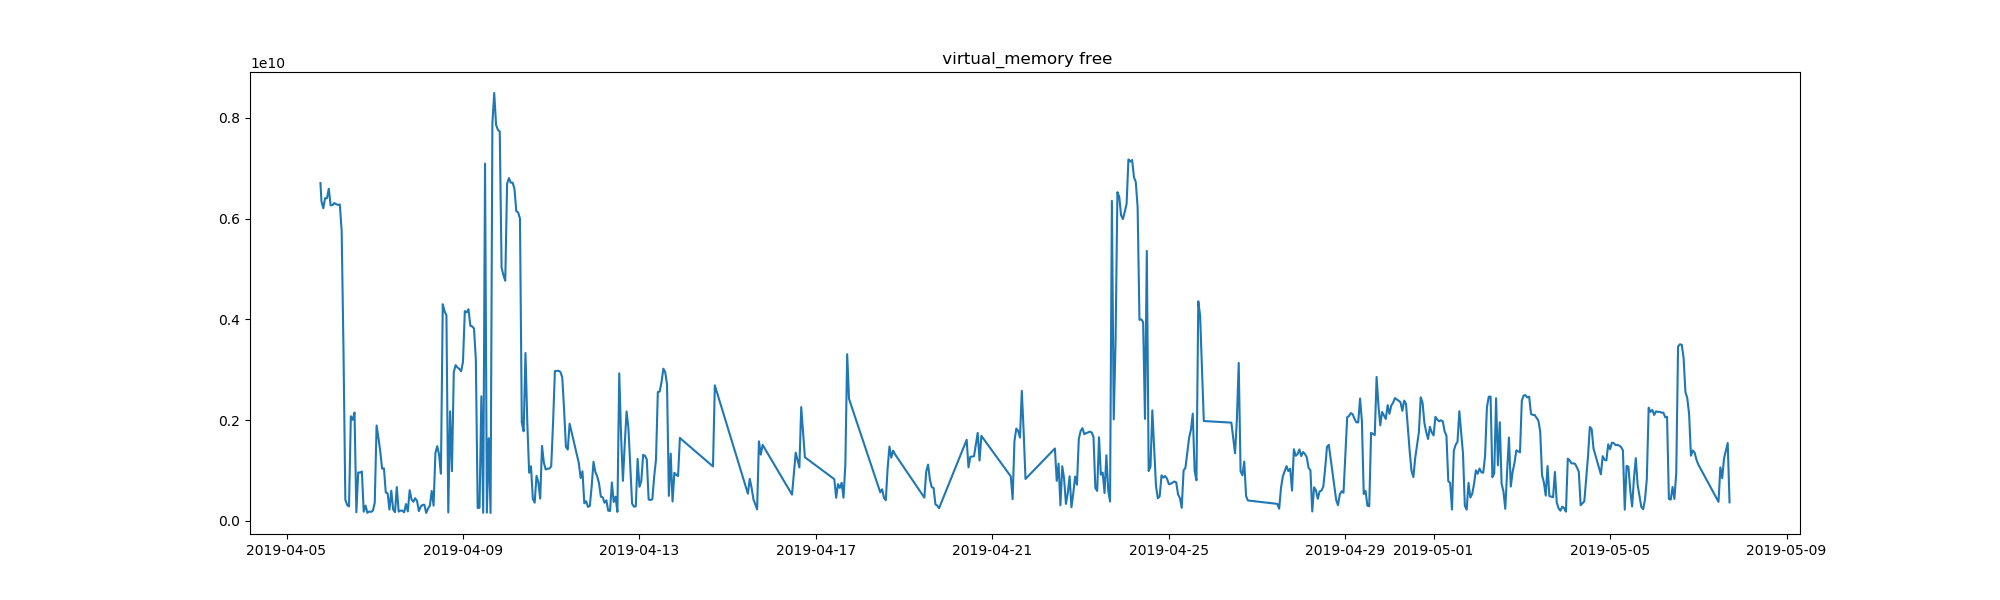 https://vsoch.github.io/watchme-system/task-memory-virtual_memory-total-available-percent-used-free.png